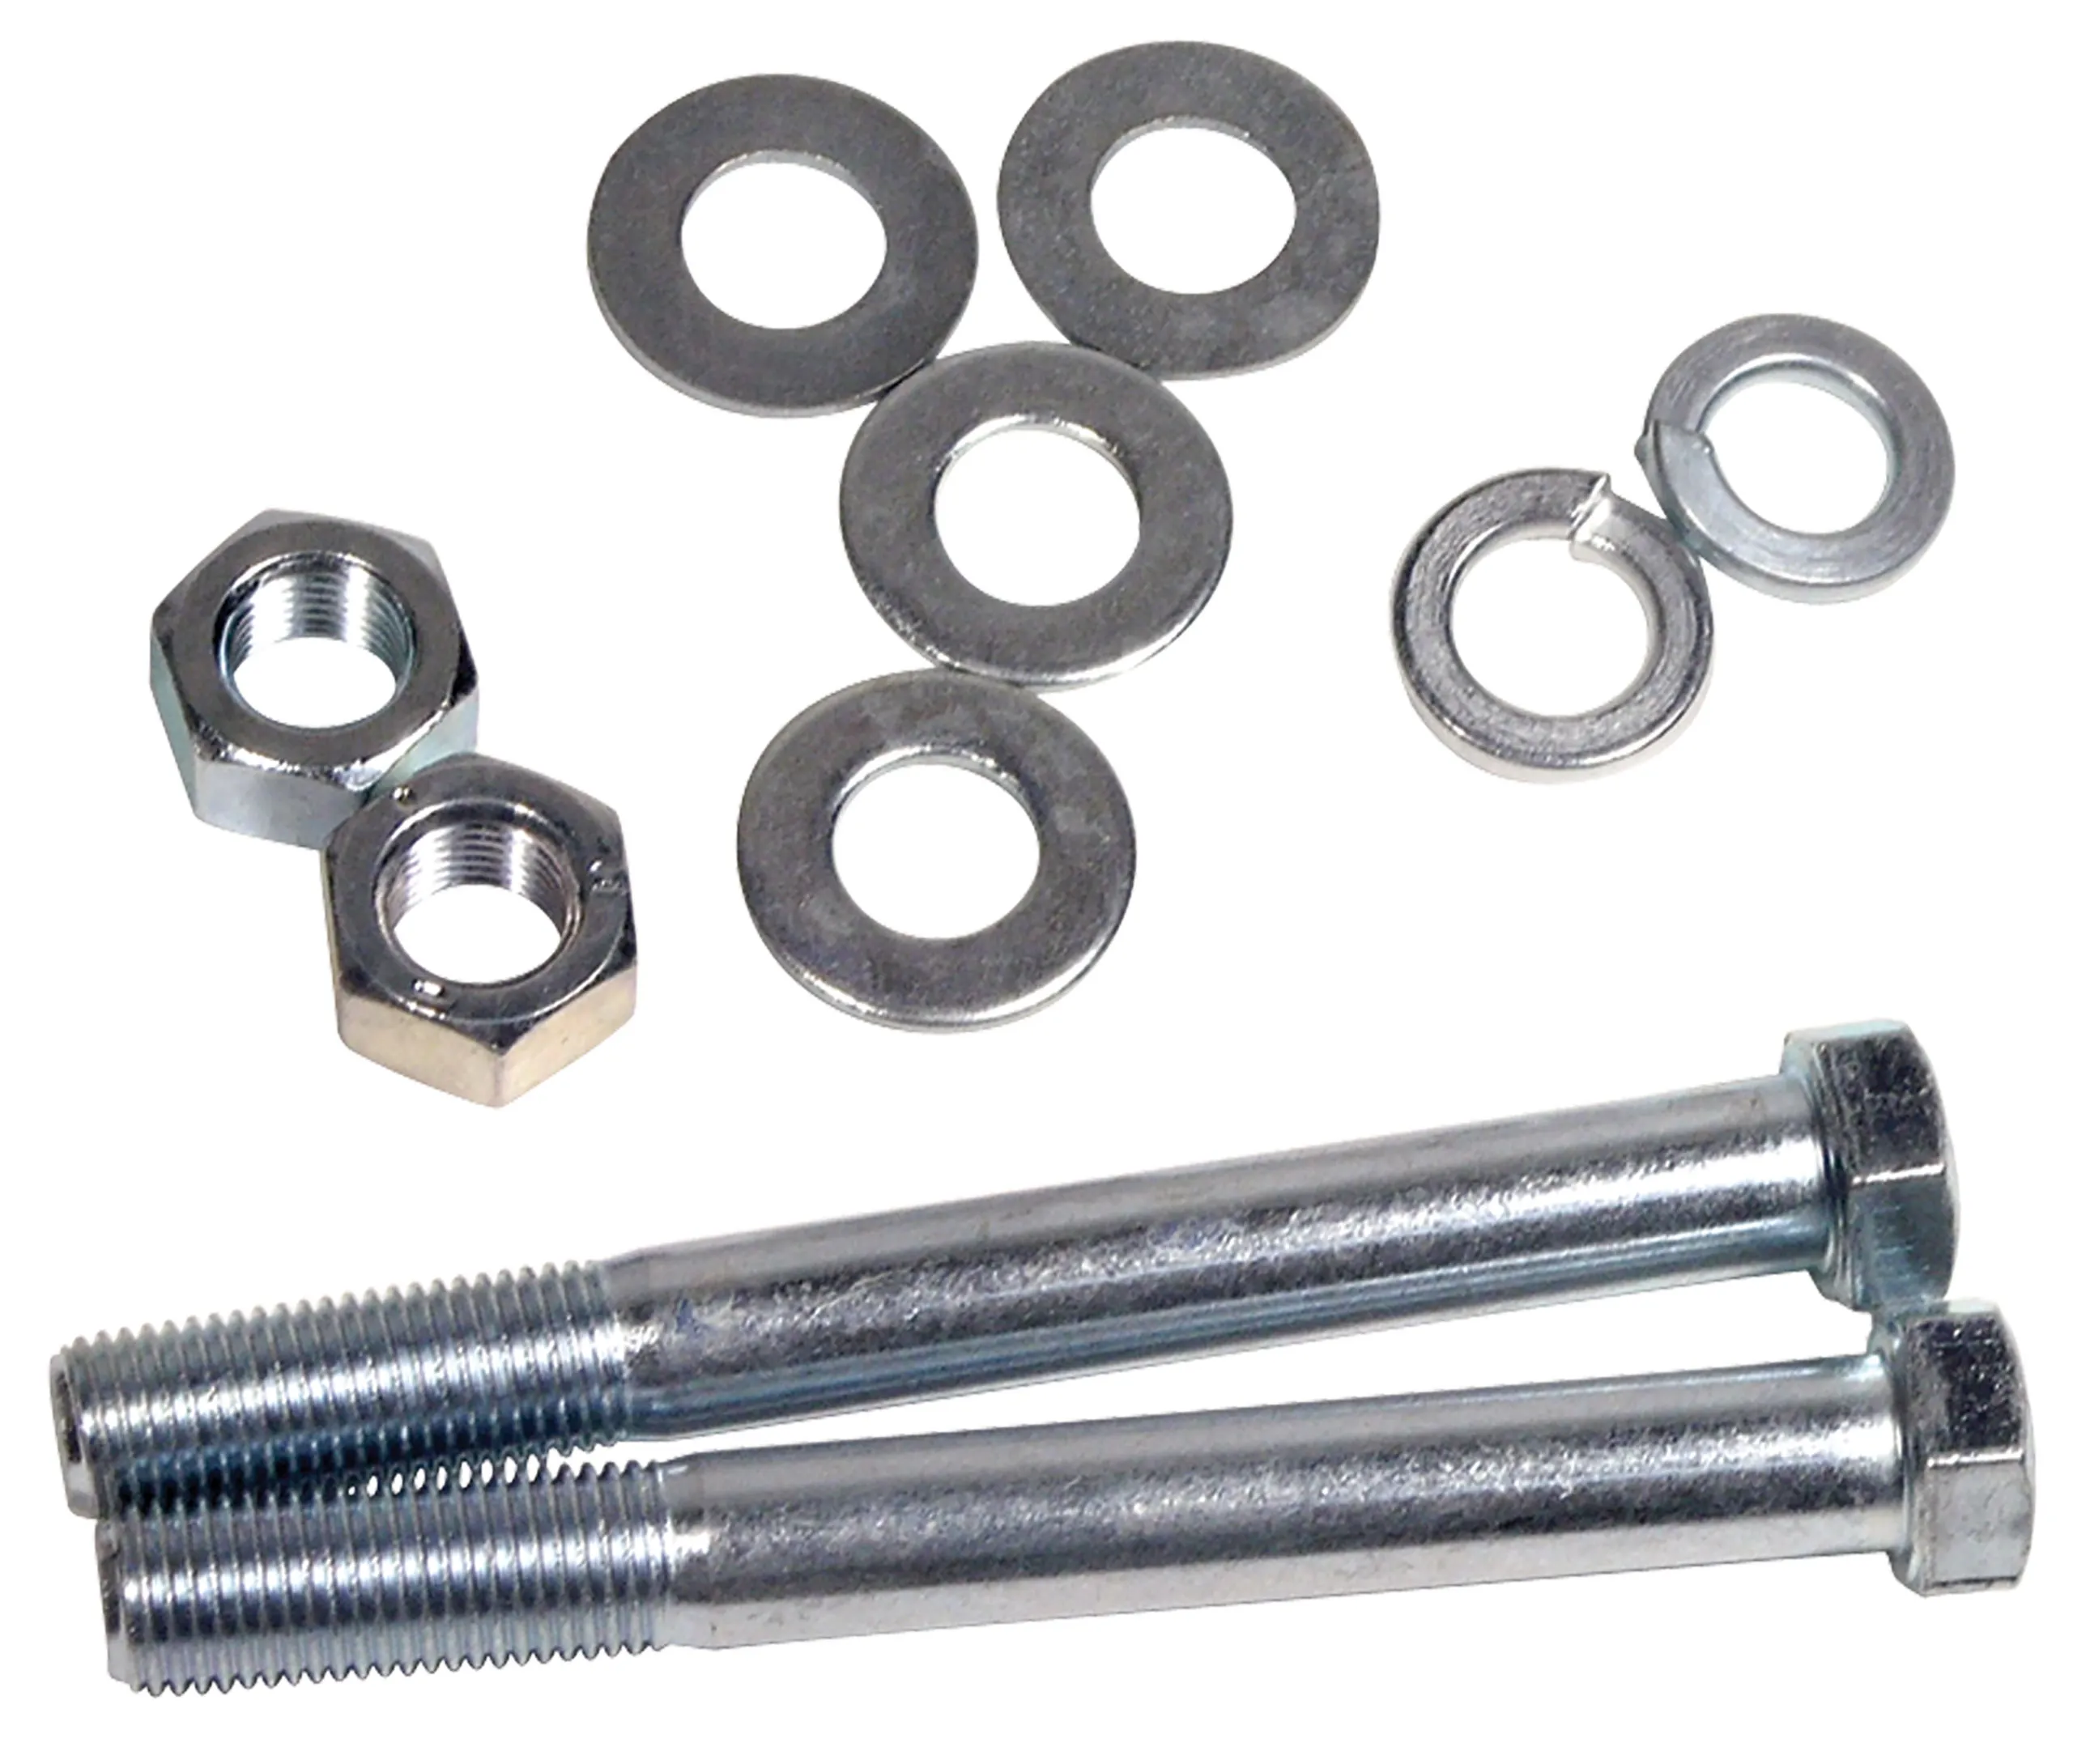 1963-1969 Chevrolet Corvette Engine Mount To Frame Bolt Set. For Non-Locking Style Mount - Auto Accessories of America